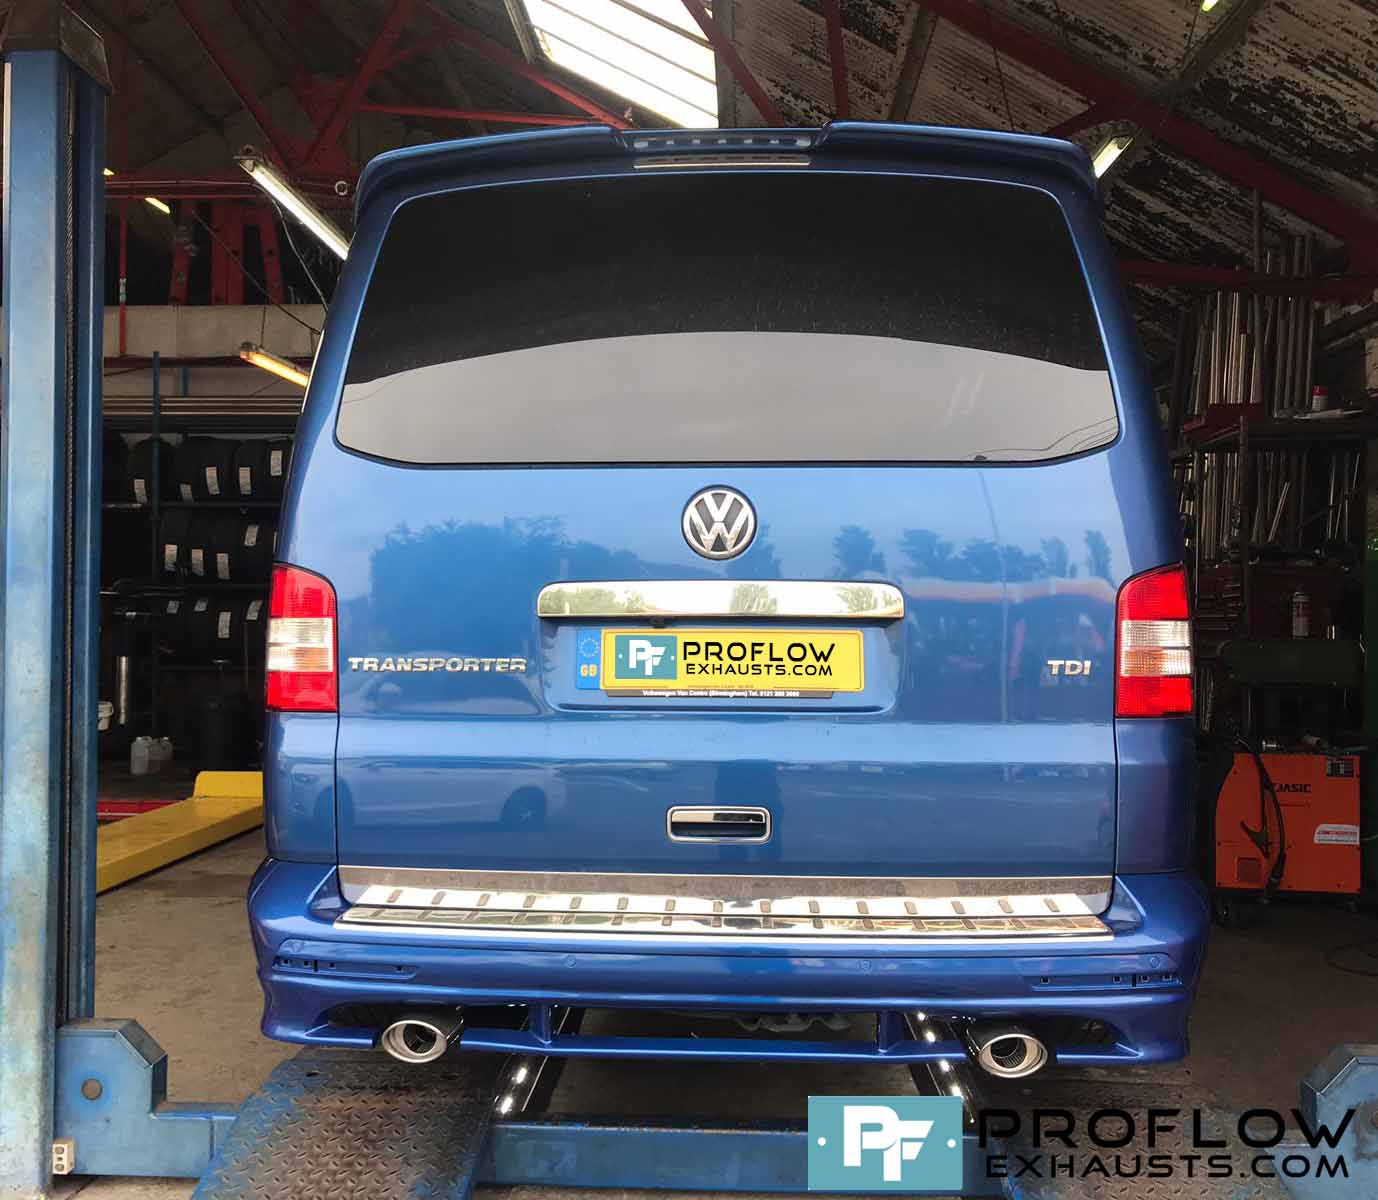 VW Transporter T5 Exhaust Stainless Steel Middle And Rear Twin Tailpipes (3)